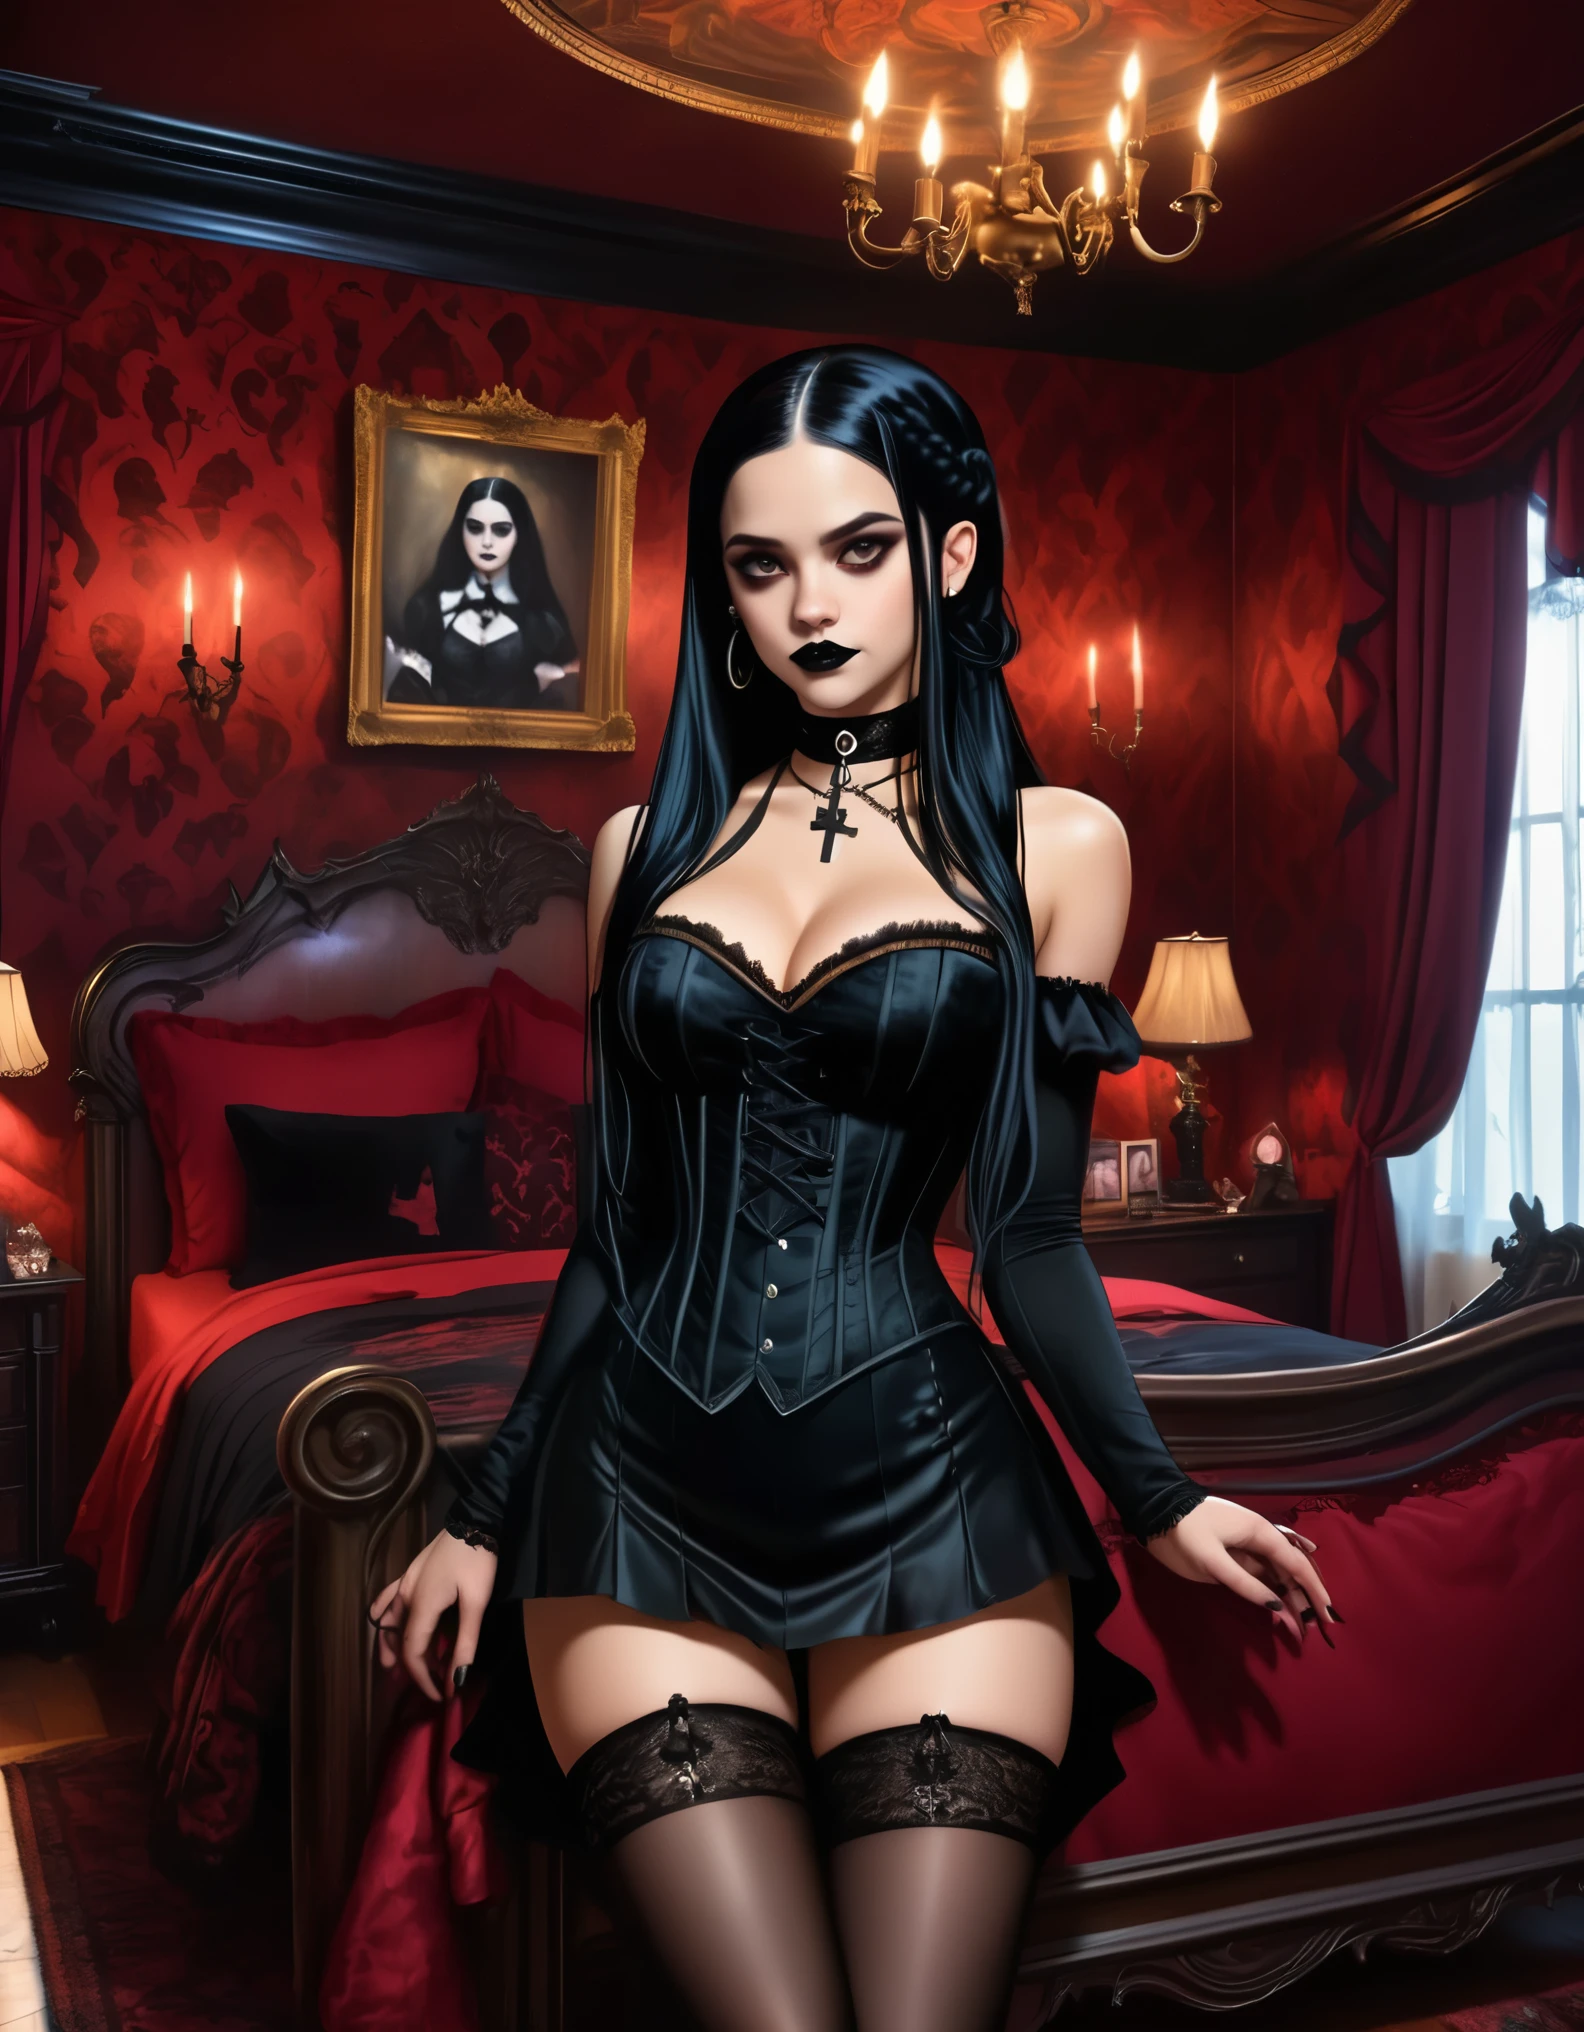 A young woman with long black hair styled in two braids and wears minimal makeup with dark eyeliner, black lipstick, sexy goth, Wednesday Addams (Jenna Ortega). The setting is a old Victorian bedroom with McCabe ornate decorations with a (Duotone {red and black]) silk bedspread. Painting on the wall of famous monsters taking a family photo. She is wearing black ornate fabric choker, black corset, black short feathered dress with black stockings. A peculiar, lifelike severed hand is placed on the bed next to her, adding an element of mystery. The lighting is eerie, coming from an unseen source, creating a since of mystery and intriguing atmosphere. Hyper realistic photo, vibrant colors, 16k.